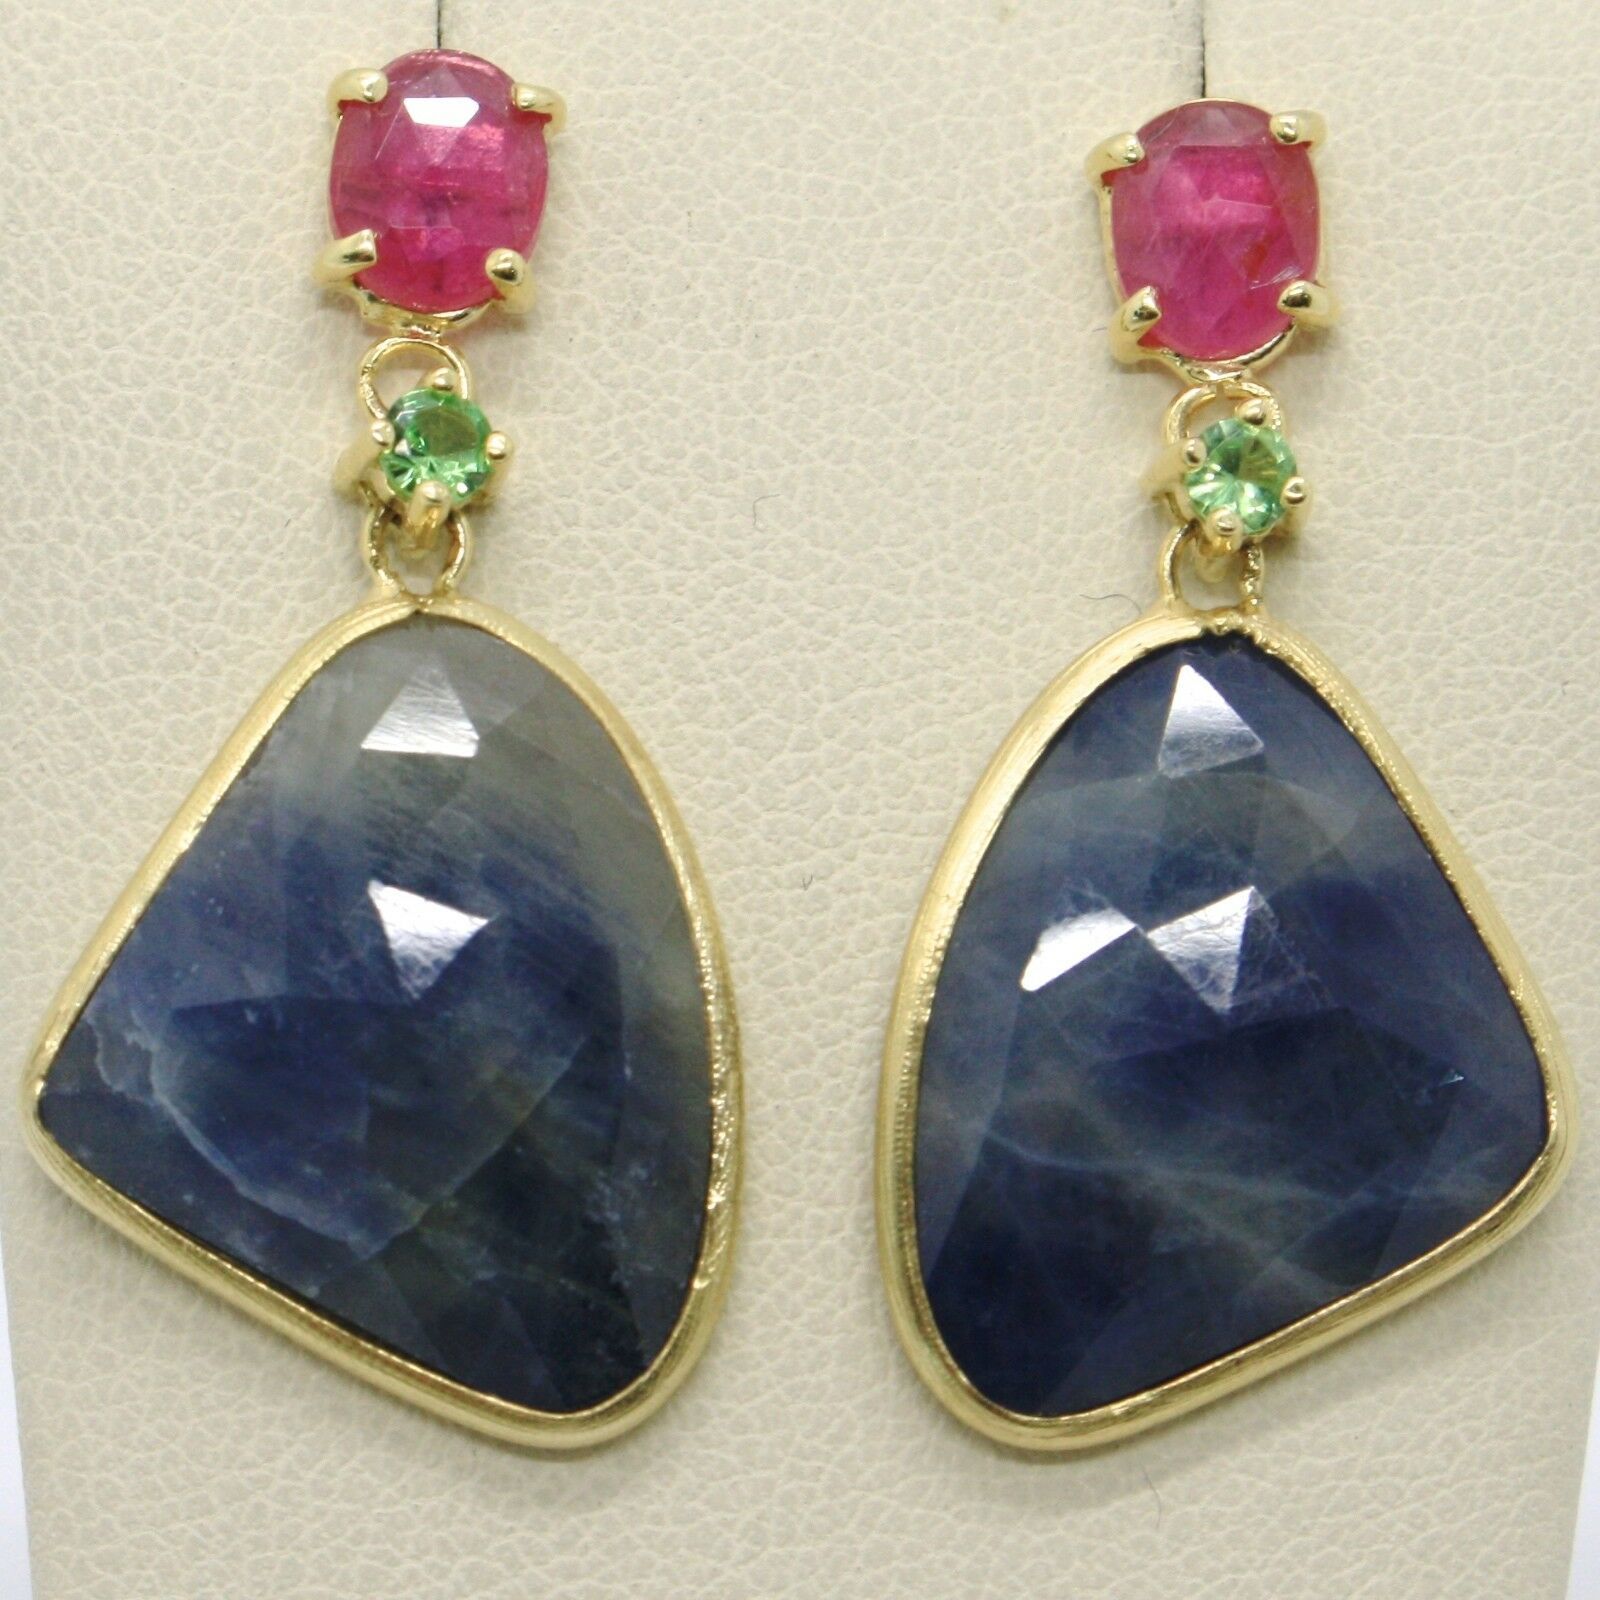 Primary image for 9K YELLOW GOLD PENDANT EARRINGS, DROP BLUE & OVAL PINK SAPPHIRE, GREEN PERIDOT